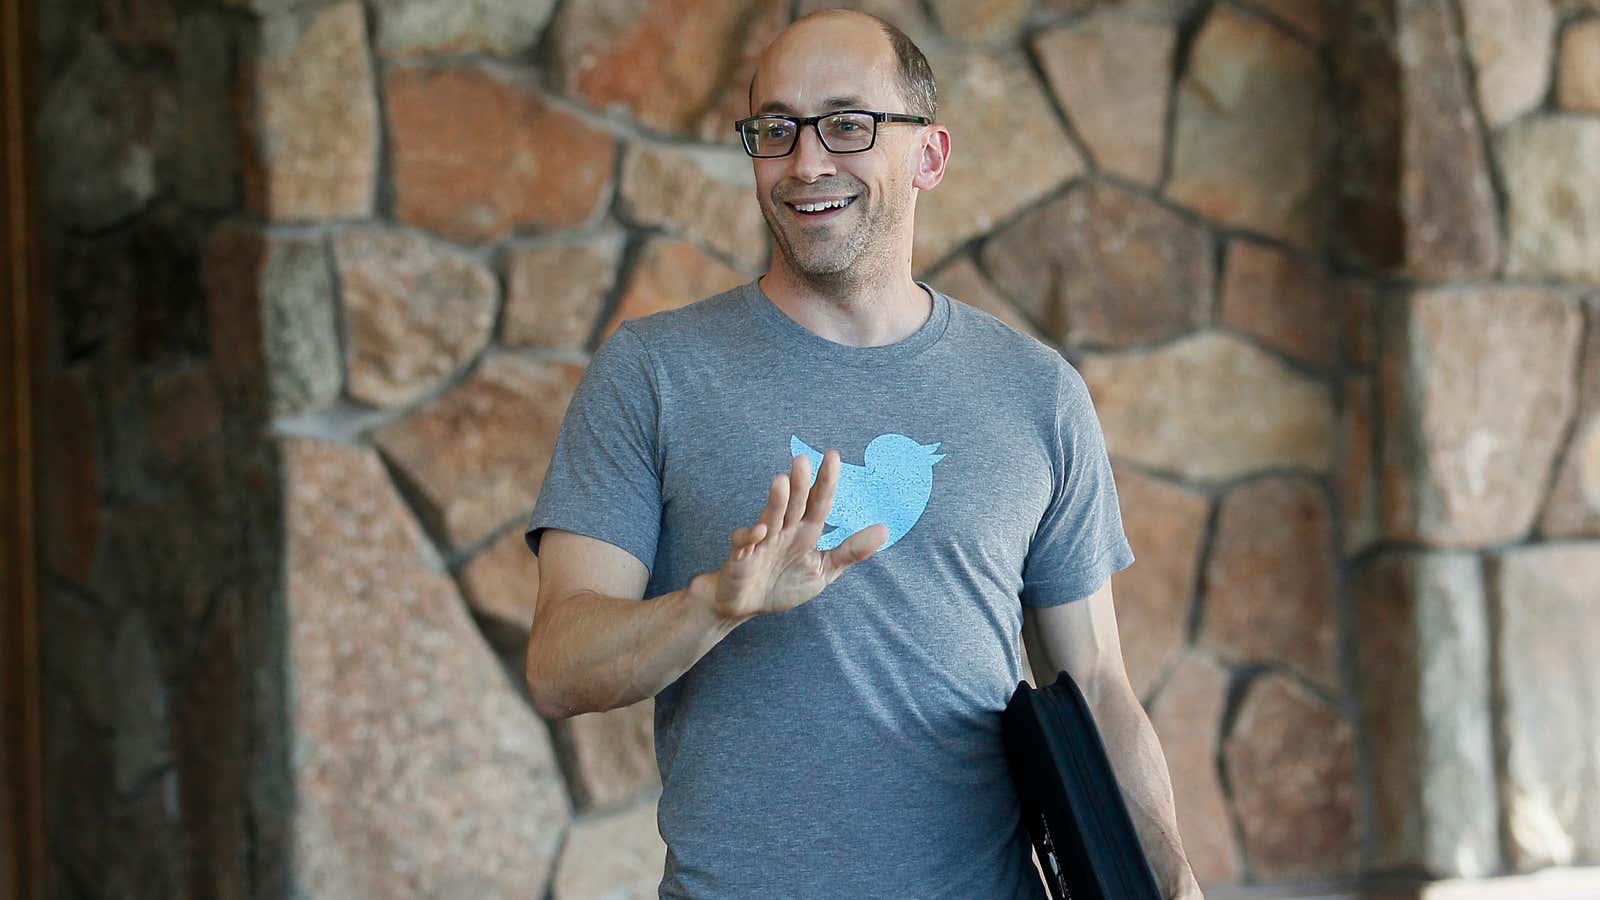 Don’t remind CEO Dick Costolo, but Twitter has 100 million fewer active users than Tumblr.